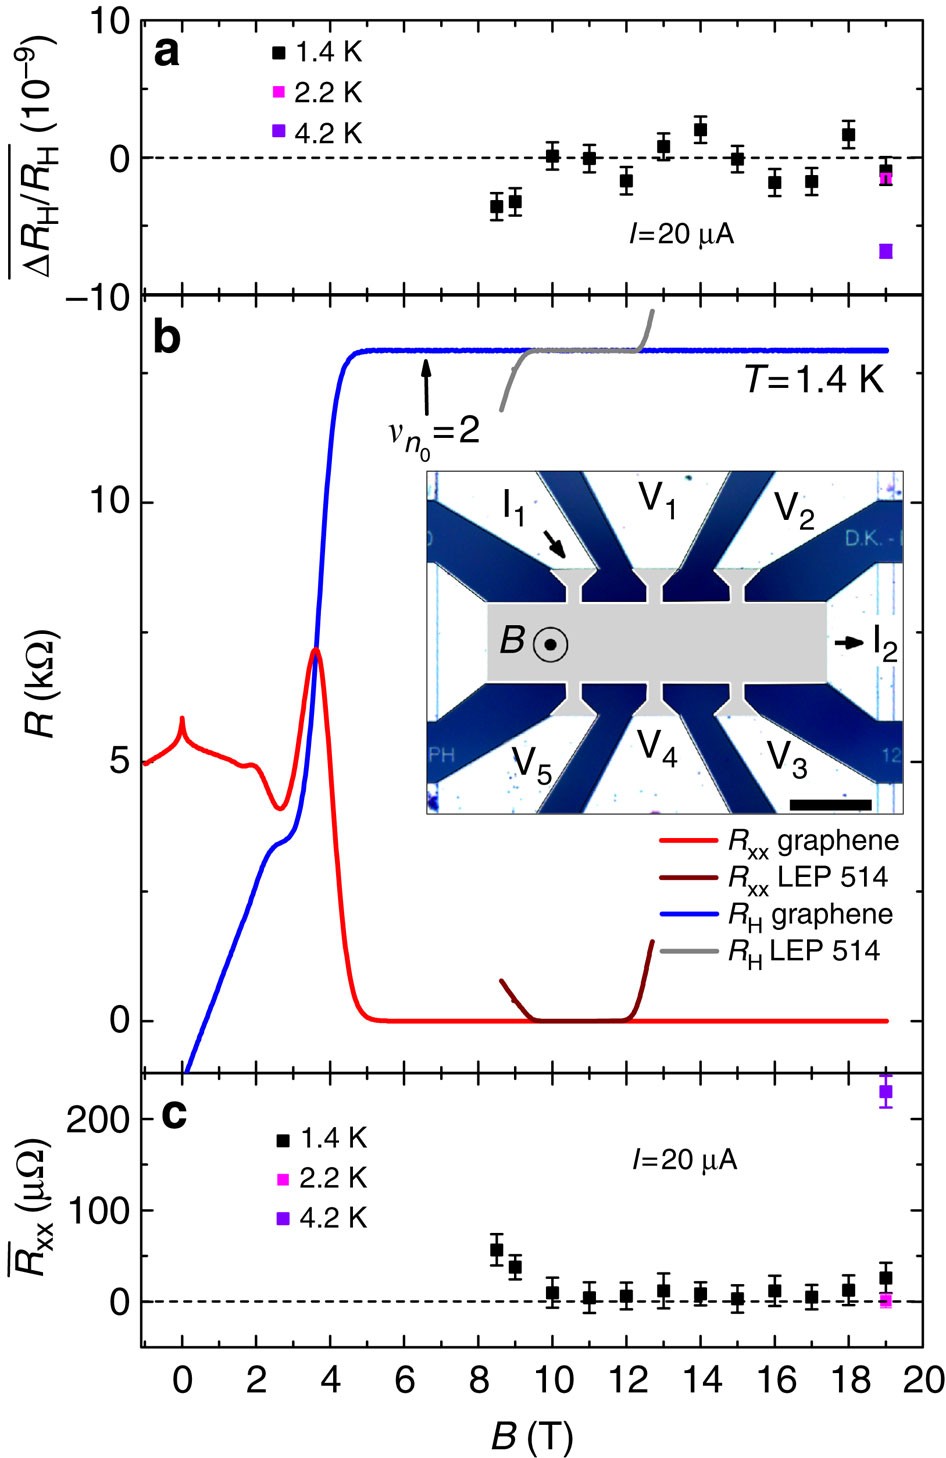 bladre sædvanligt Selvrespekt Quantum Hall resistance standards from graphene grown by chemical vapour  deposition on silicon carbide | Nature Communications